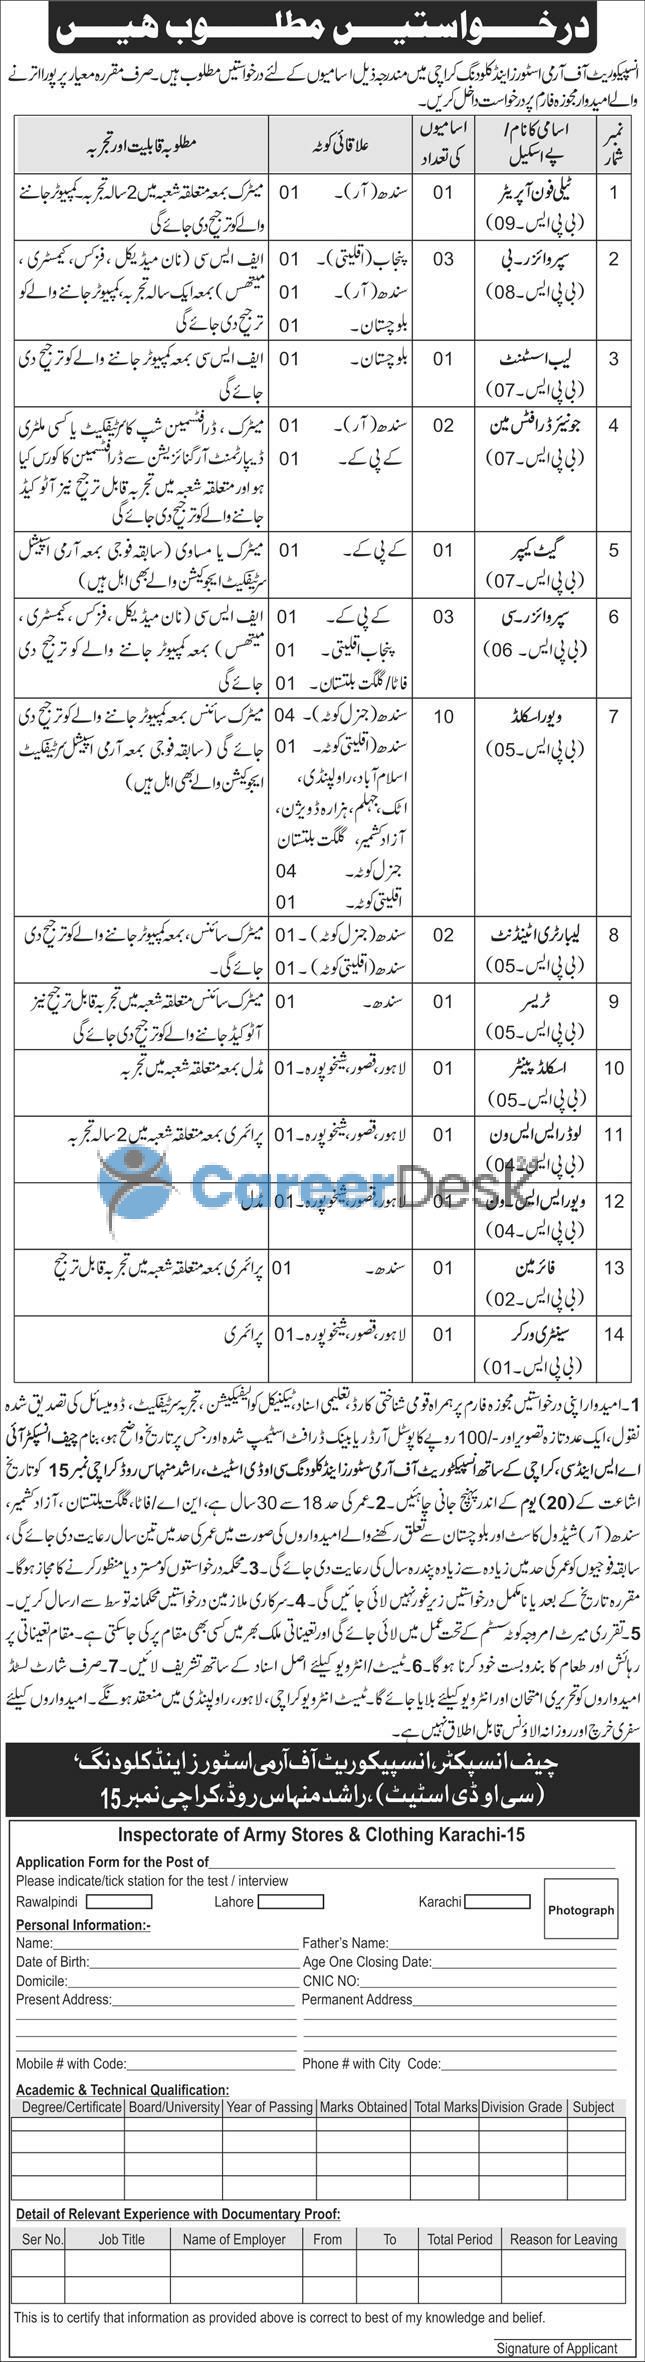 Pakistan Army Civilian Jobs Inspectorate of Army Stores and Clothing 2022